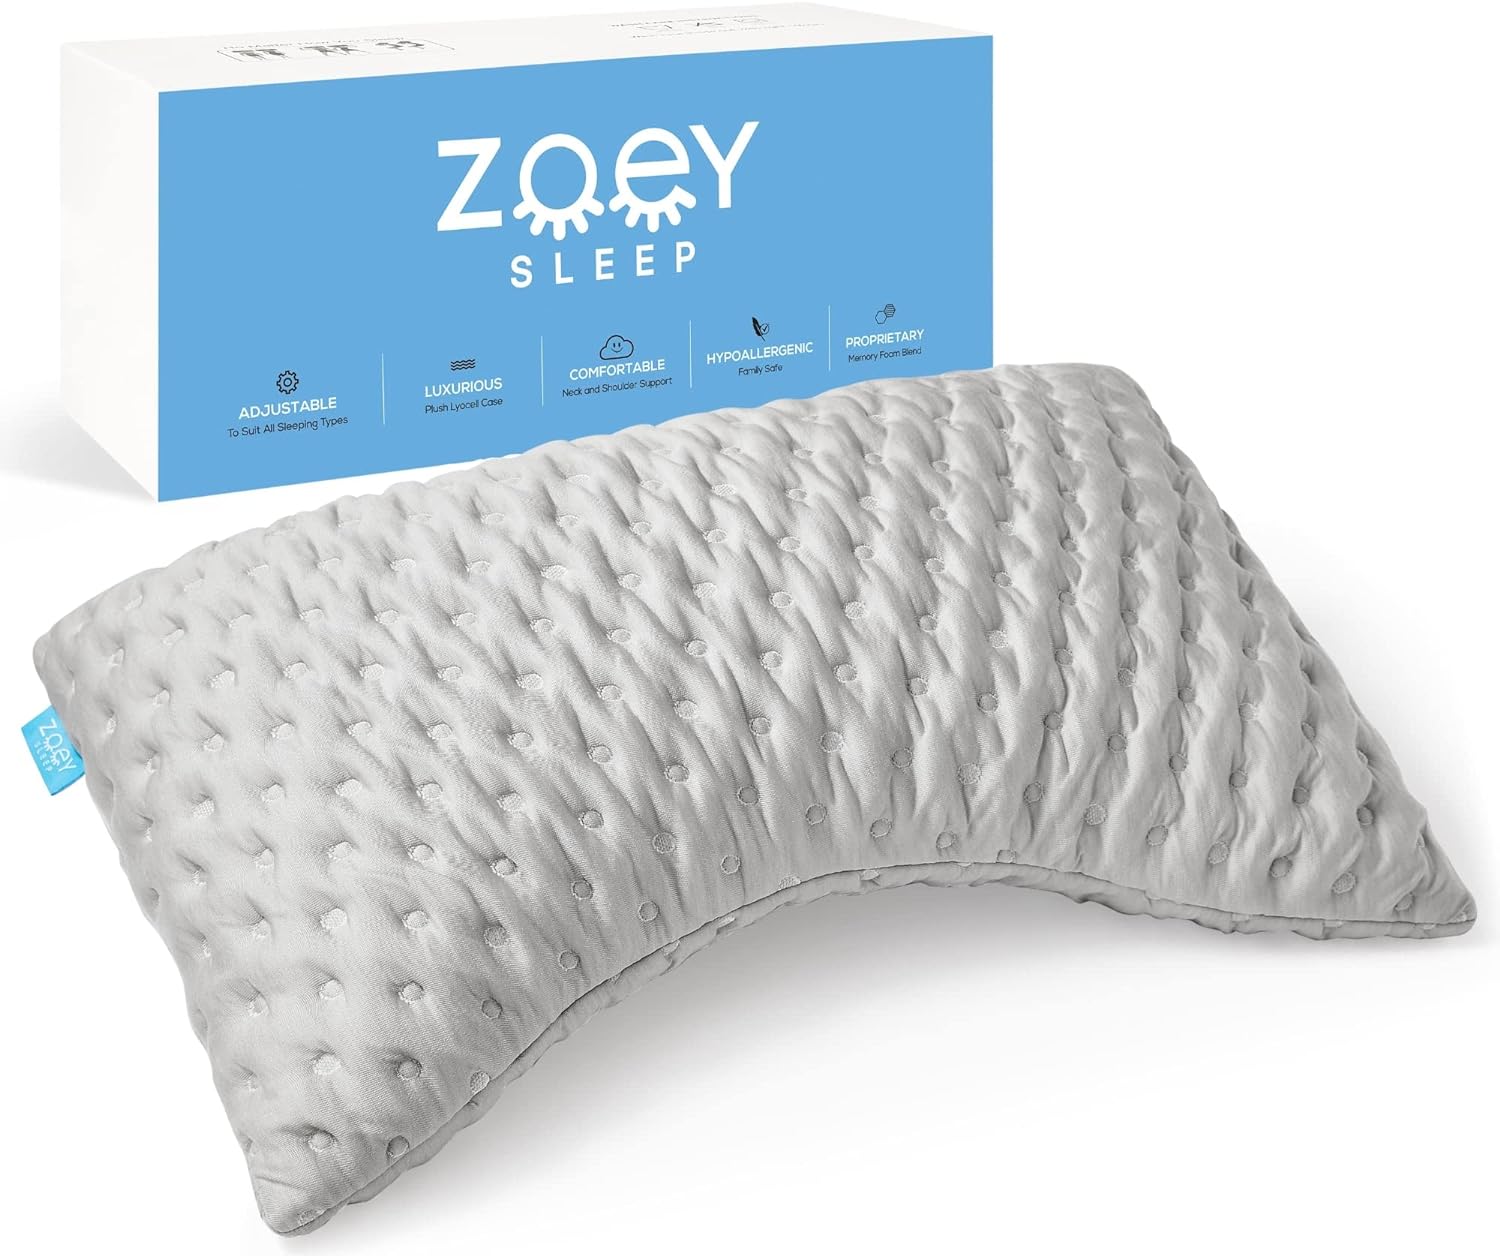 Zoey Sleep Side Sleep Pillow for Neck and Shoulder Pain Relief - Adjustable Memory Foam Bed Pillows for Sleeping - Plush Machine Washable Pillow Cover - Queen Size 19&#34; x 29&#34; Queen, Grey